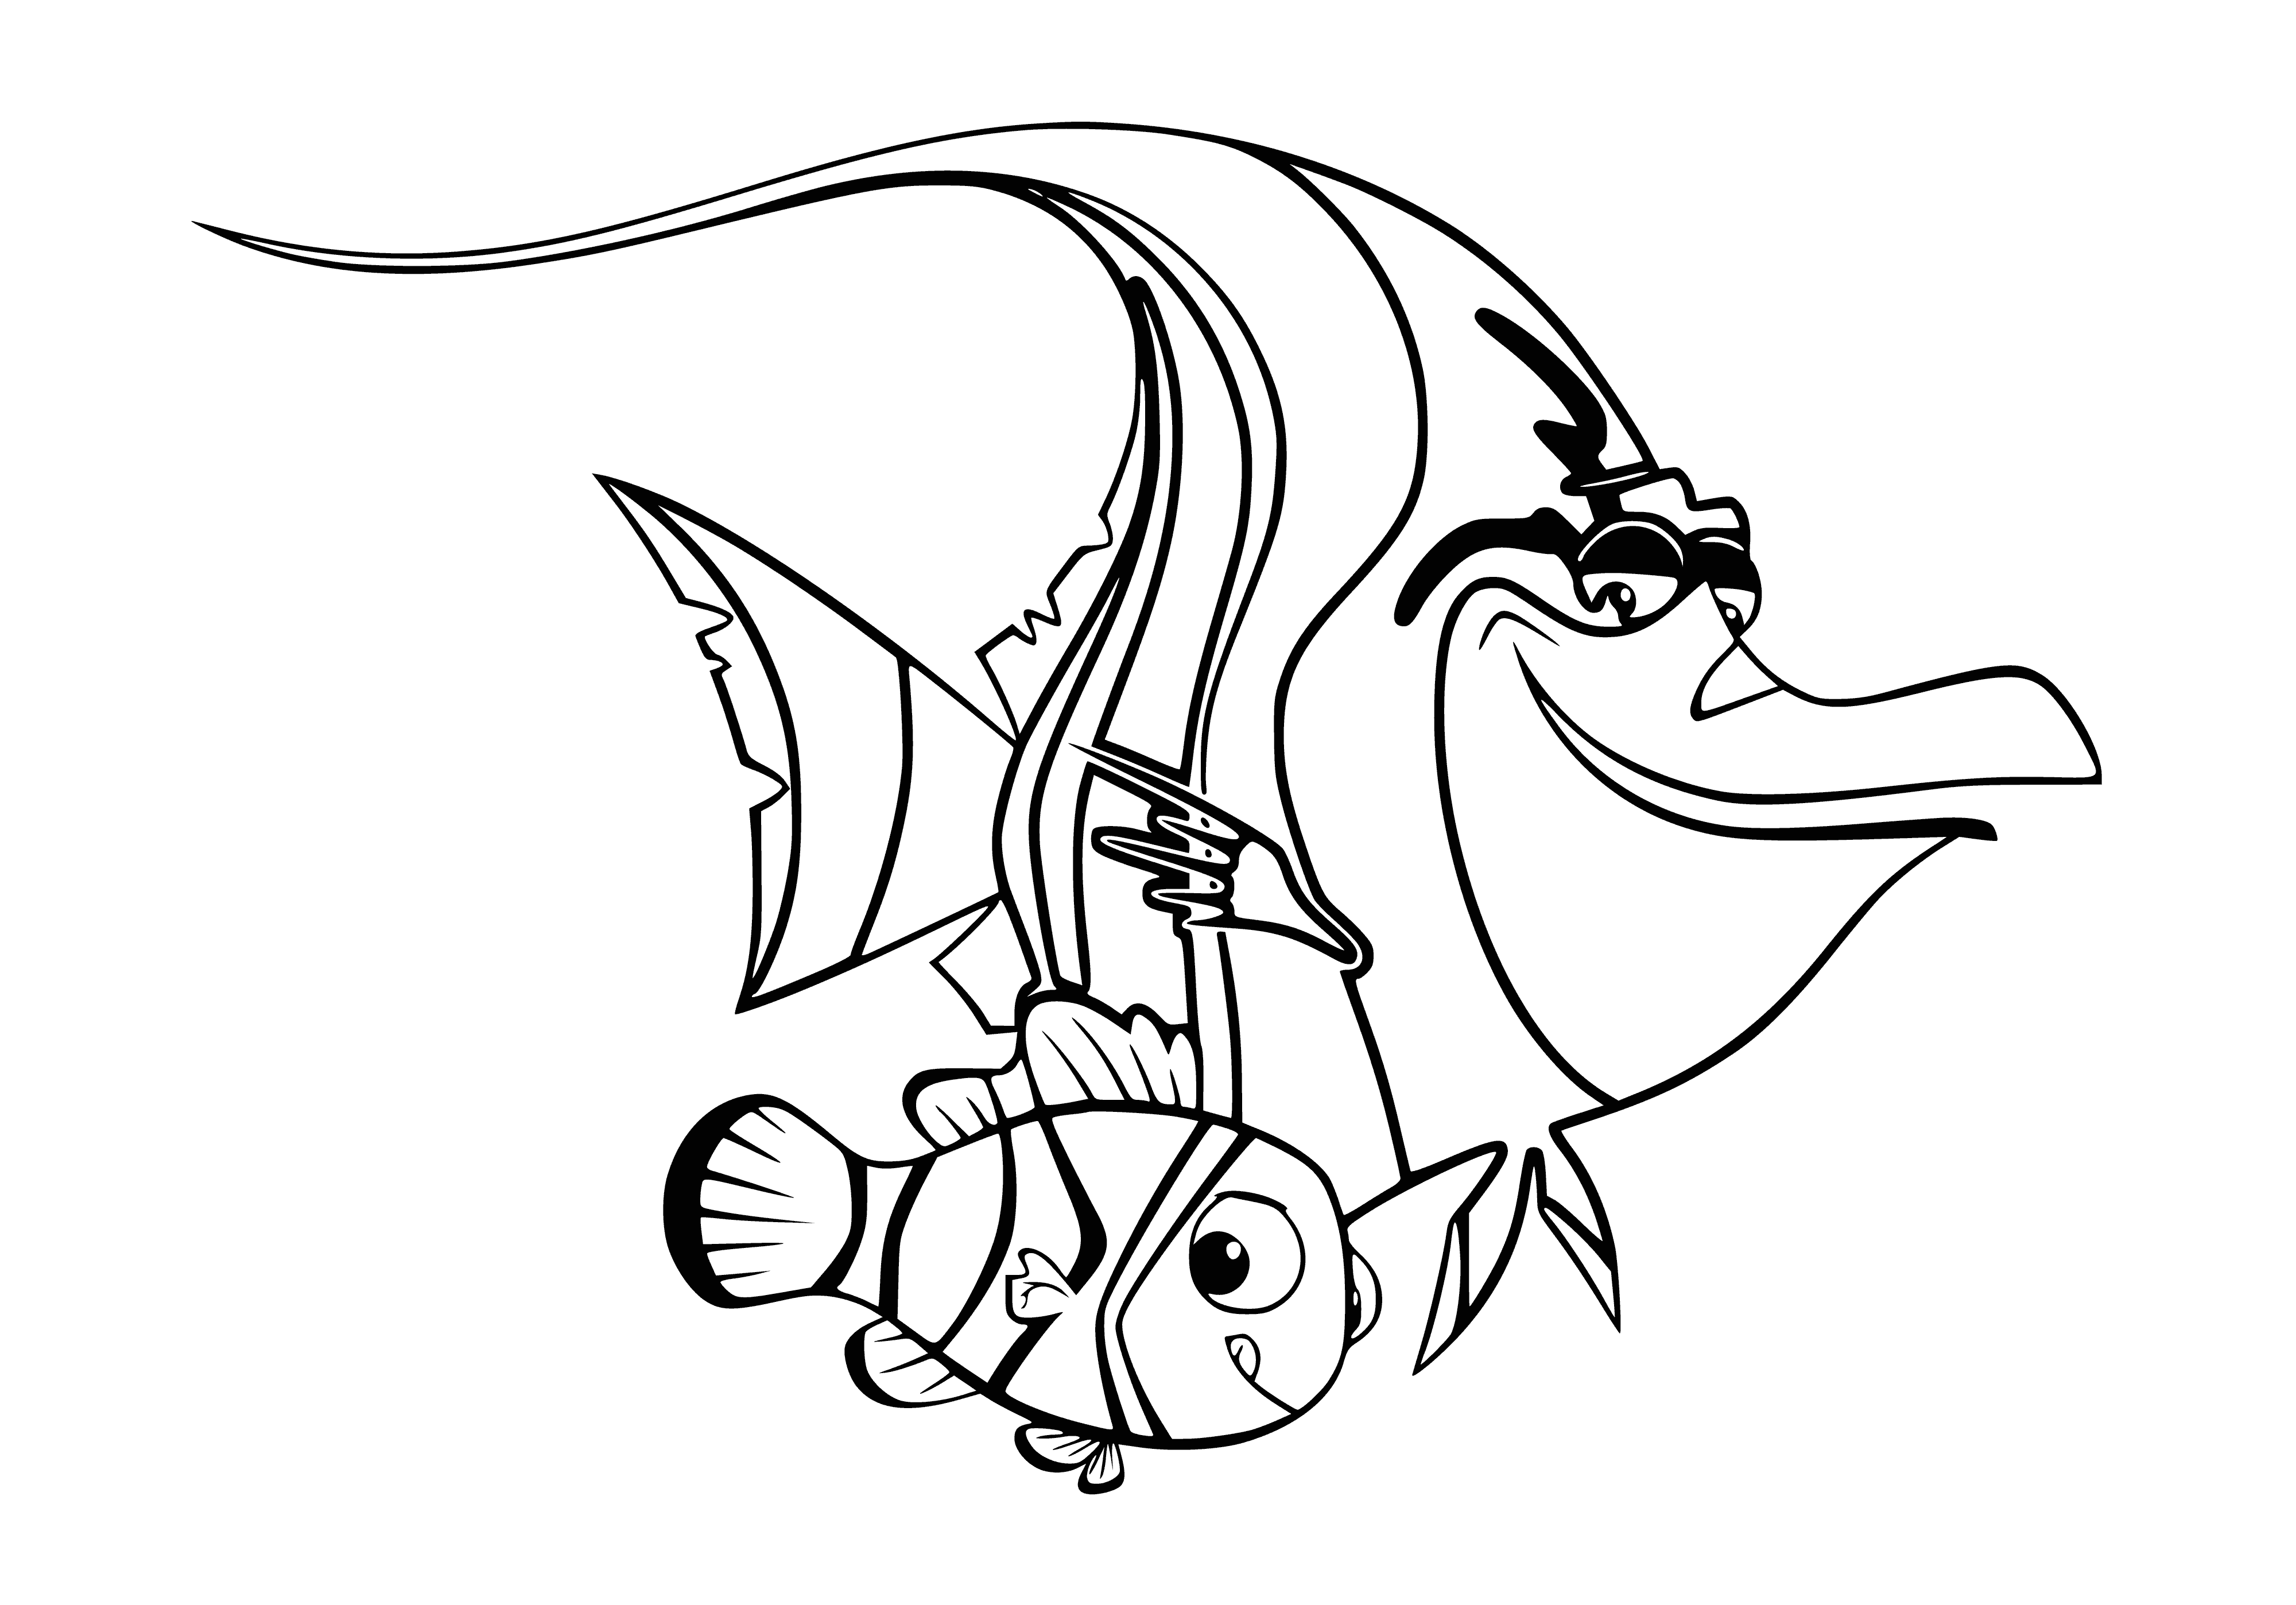 coloring page: Smaller fish chases larger fish with a large scar -- a sign of survival in the sea.